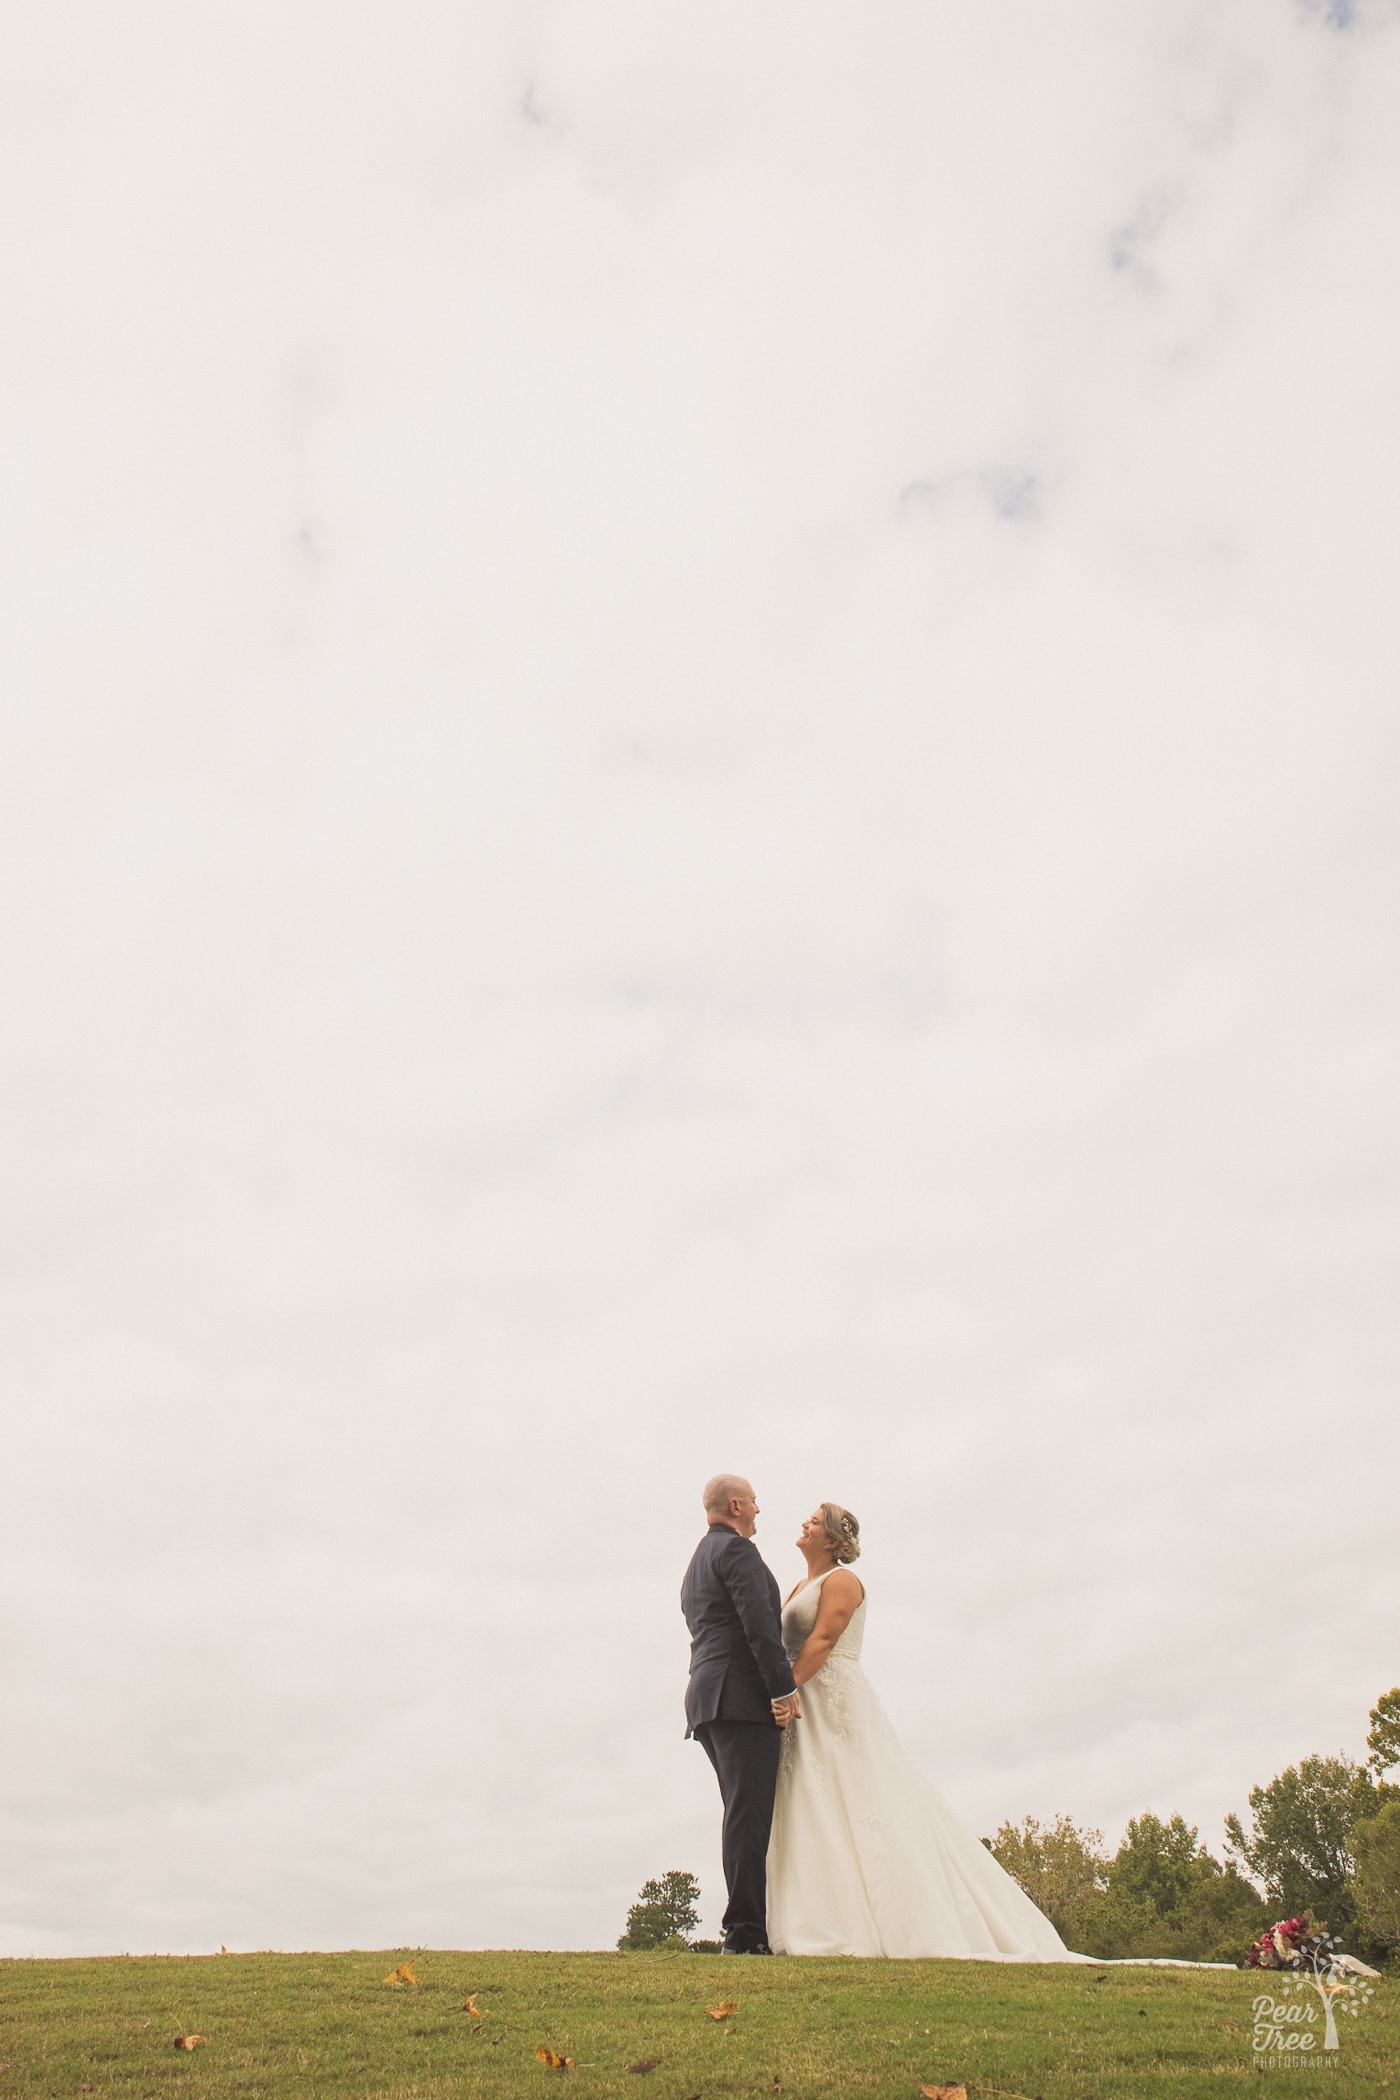 Bride and groom standing close on a hill with big sky over them